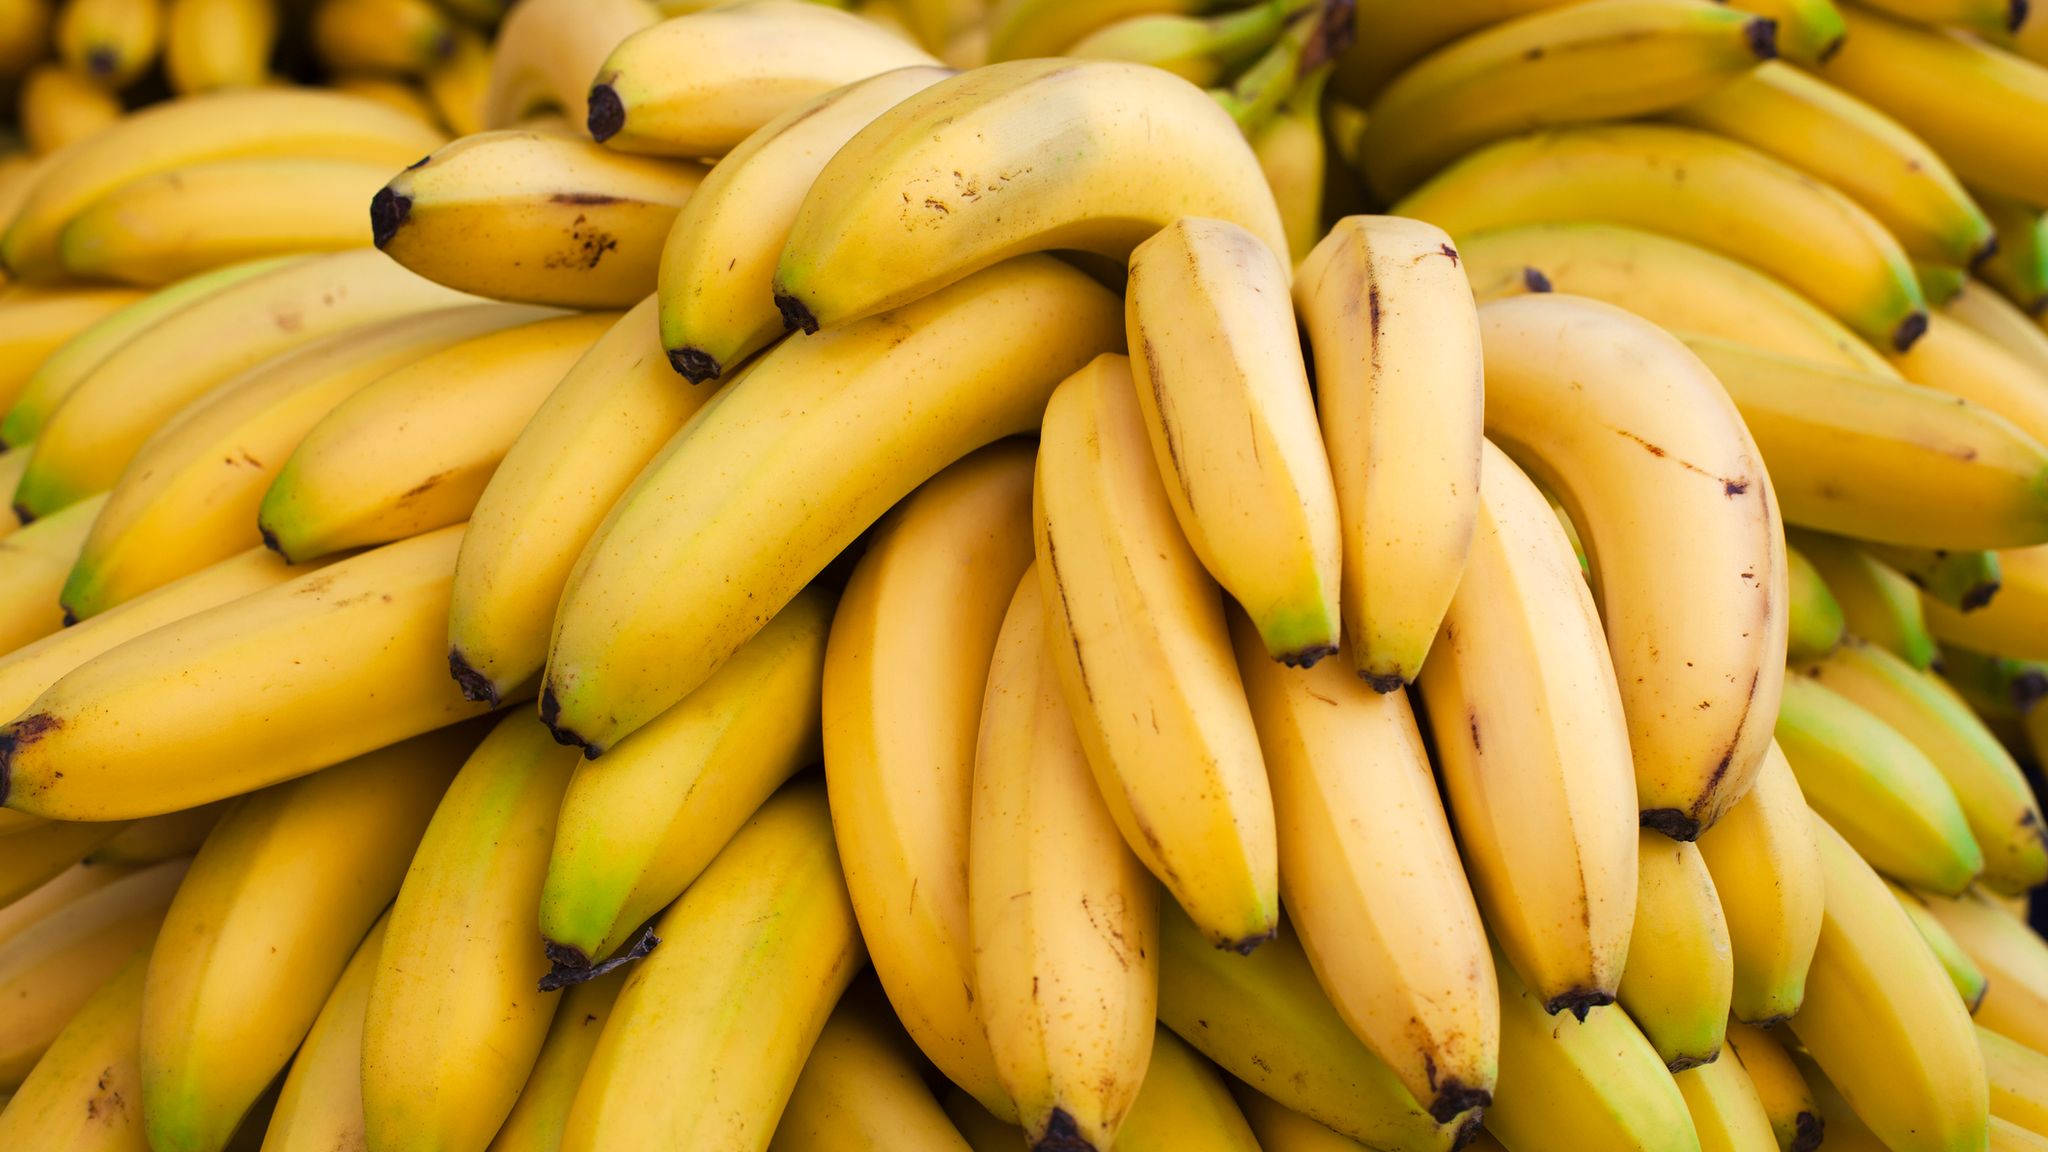 Can a Banana Before Bed Help You Sleep Better?
